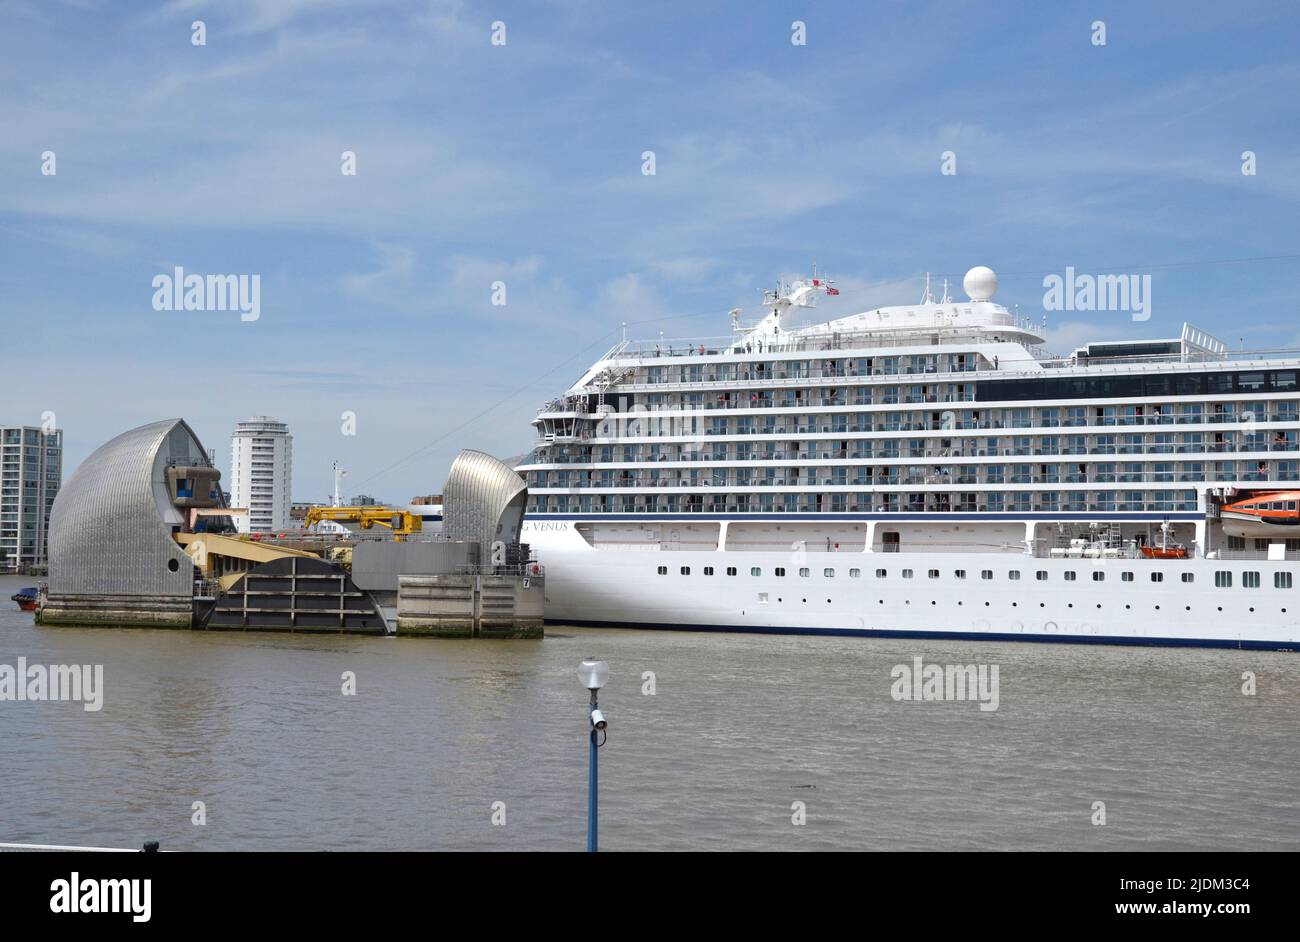 Cruise ship Viking Venus owned by Viking Ocean Cruises passing through the Thames Barrier on the River Thames in London Stock Photo